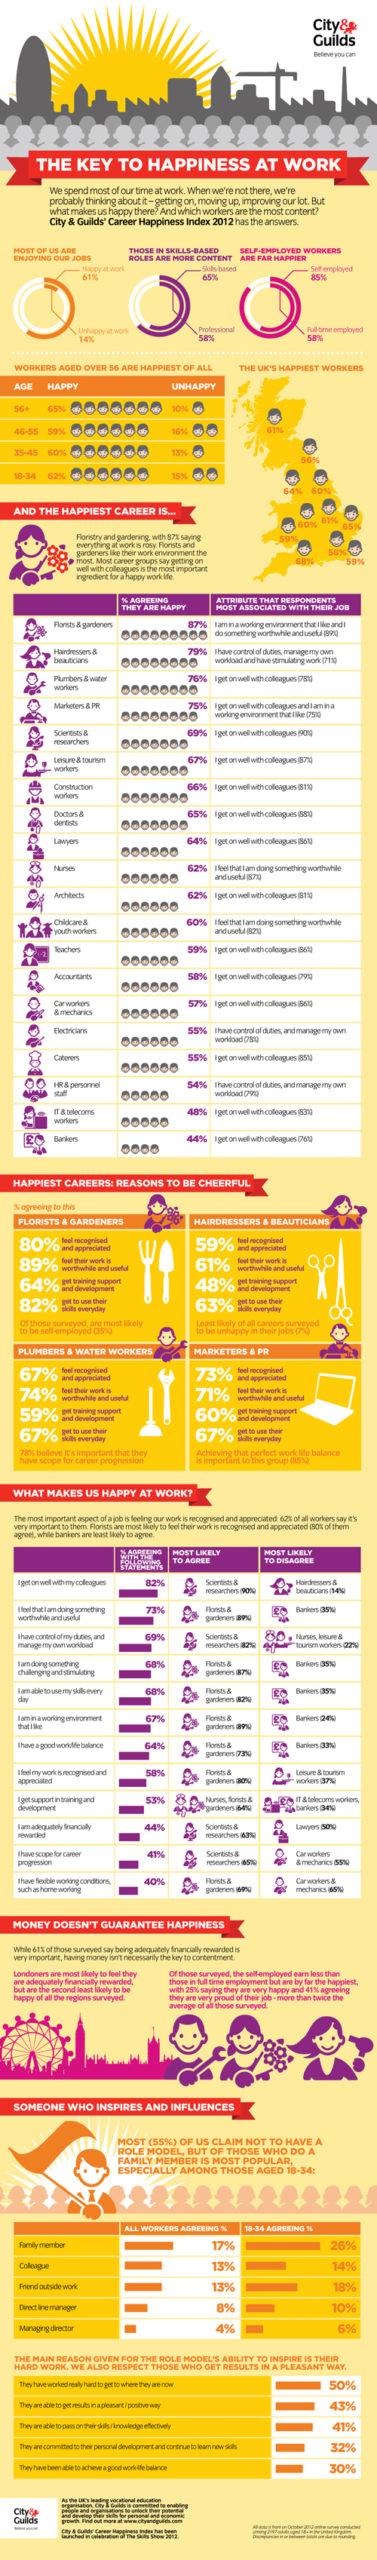 Infographic of Career Happiness Index 2012